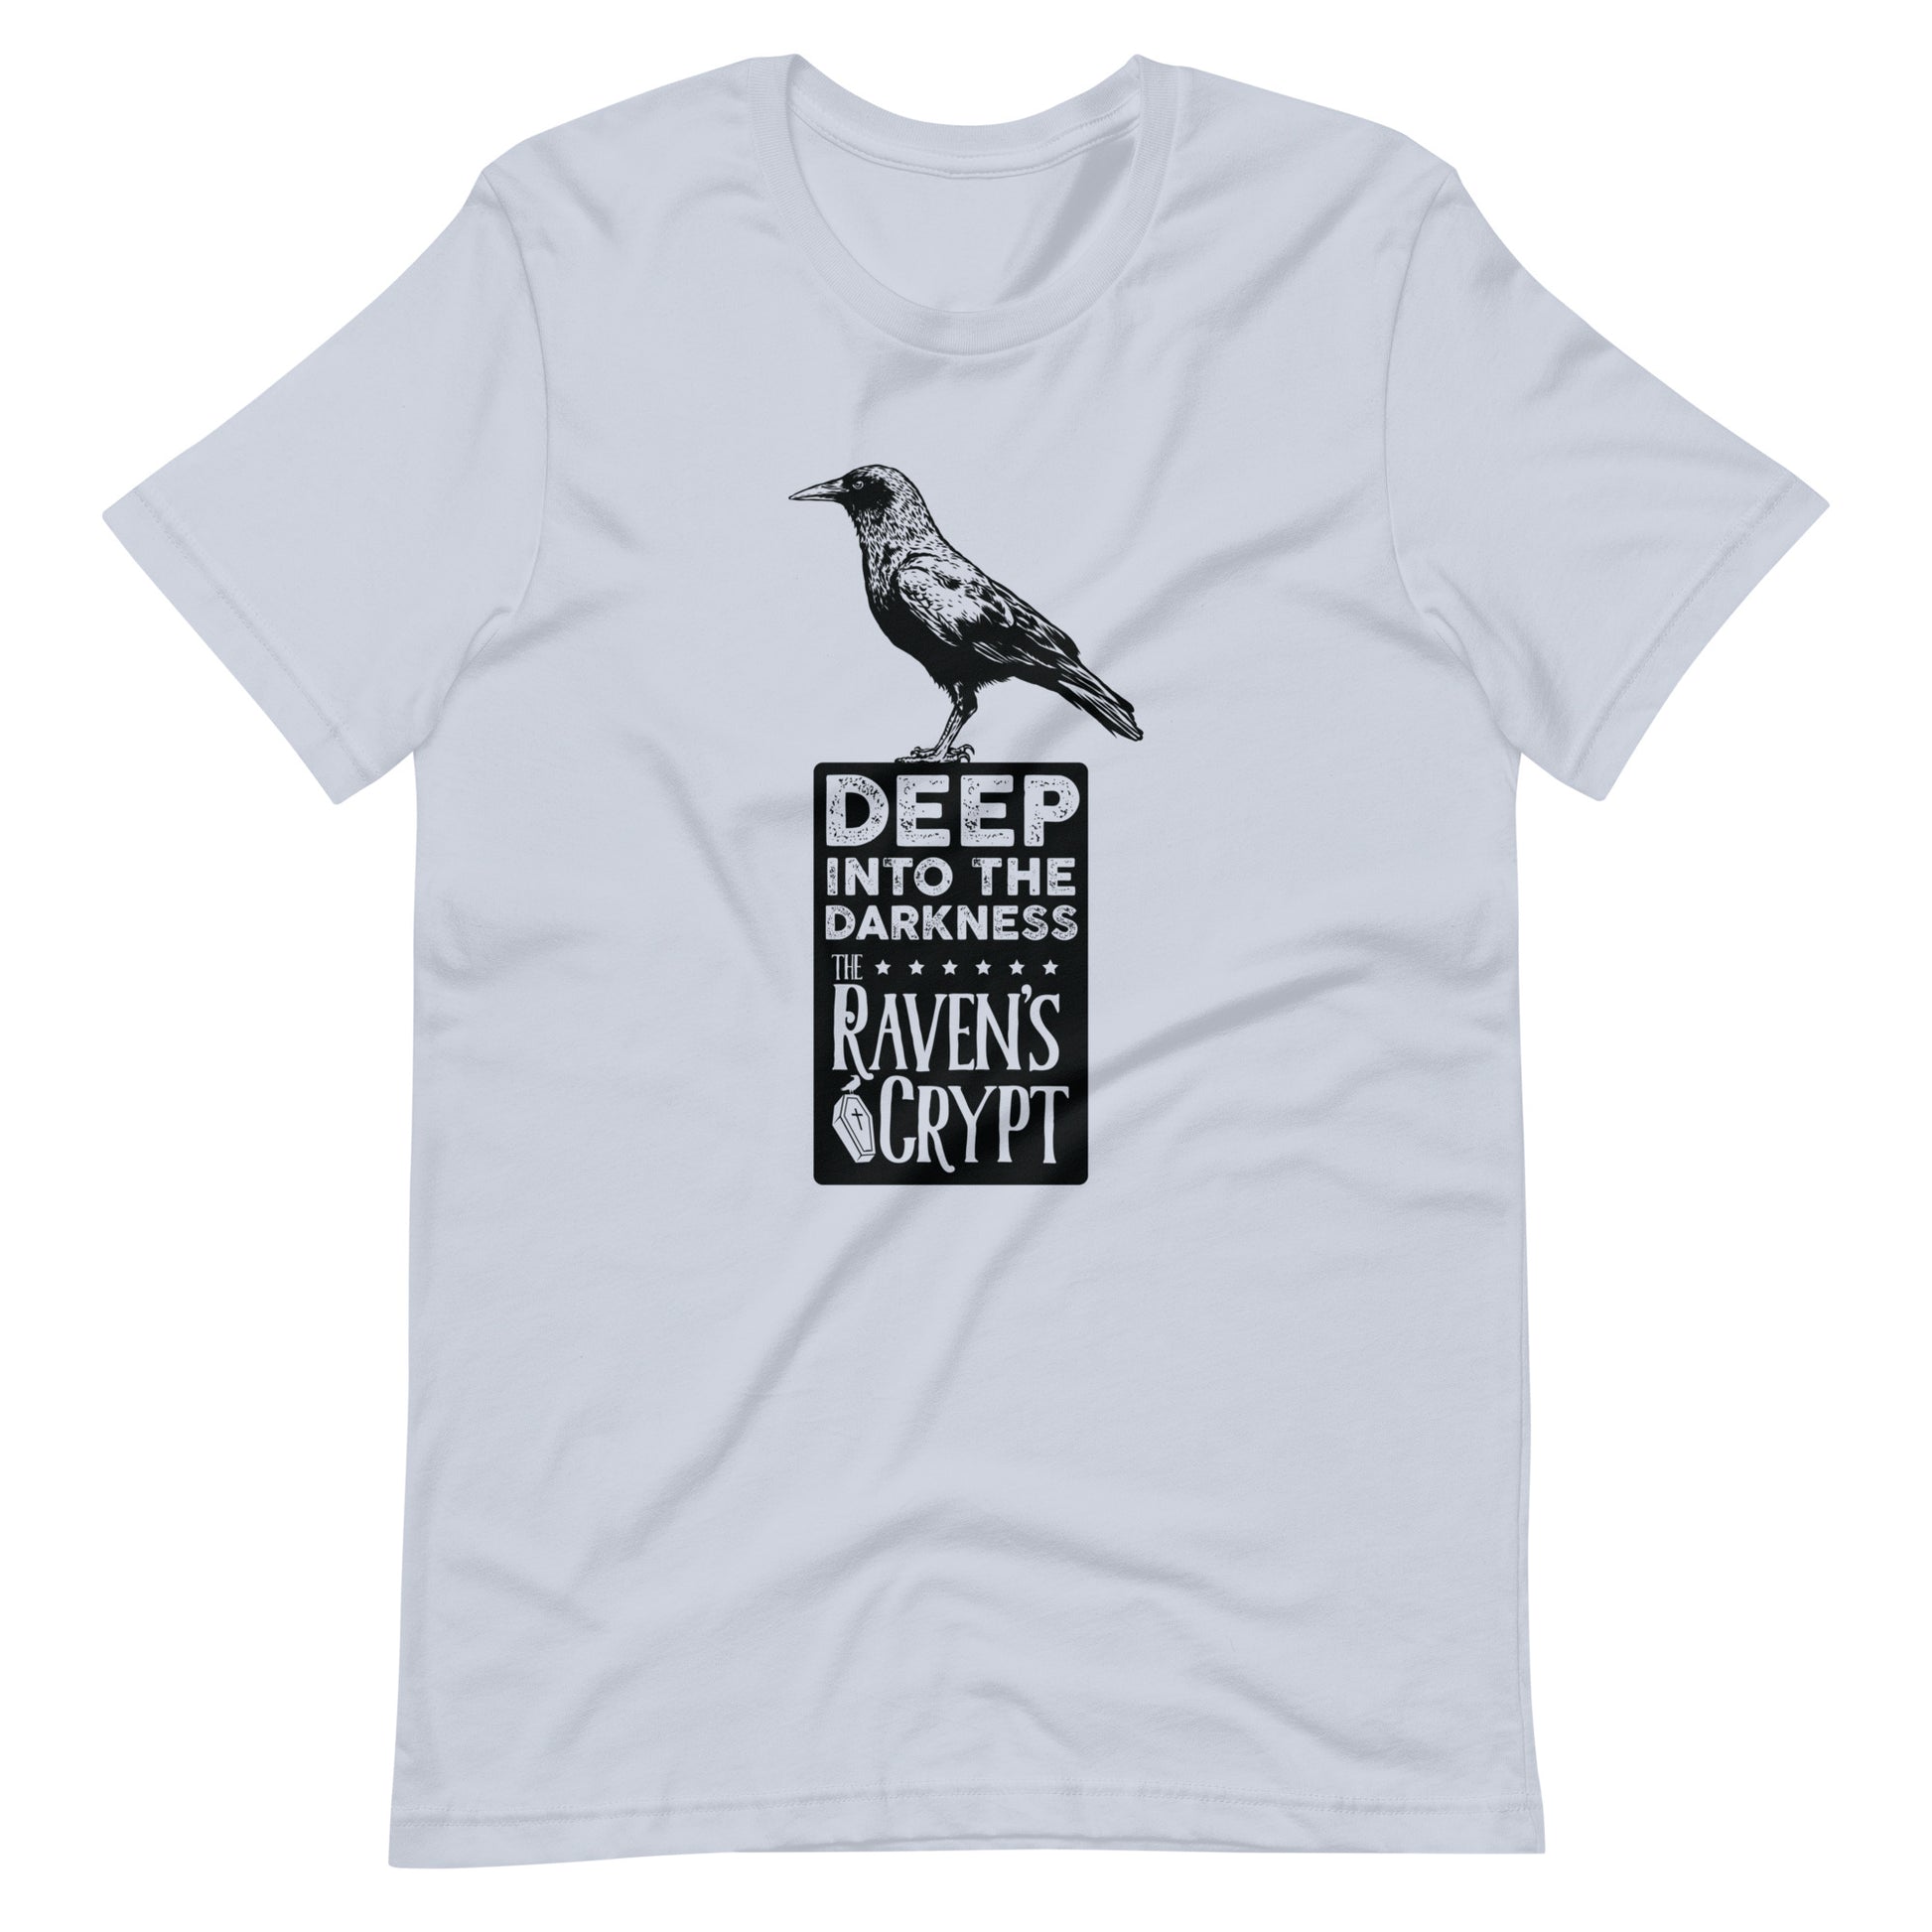 Deep Into the Darkness Crypt 2 - Men's t-shirt - Light Blue Front